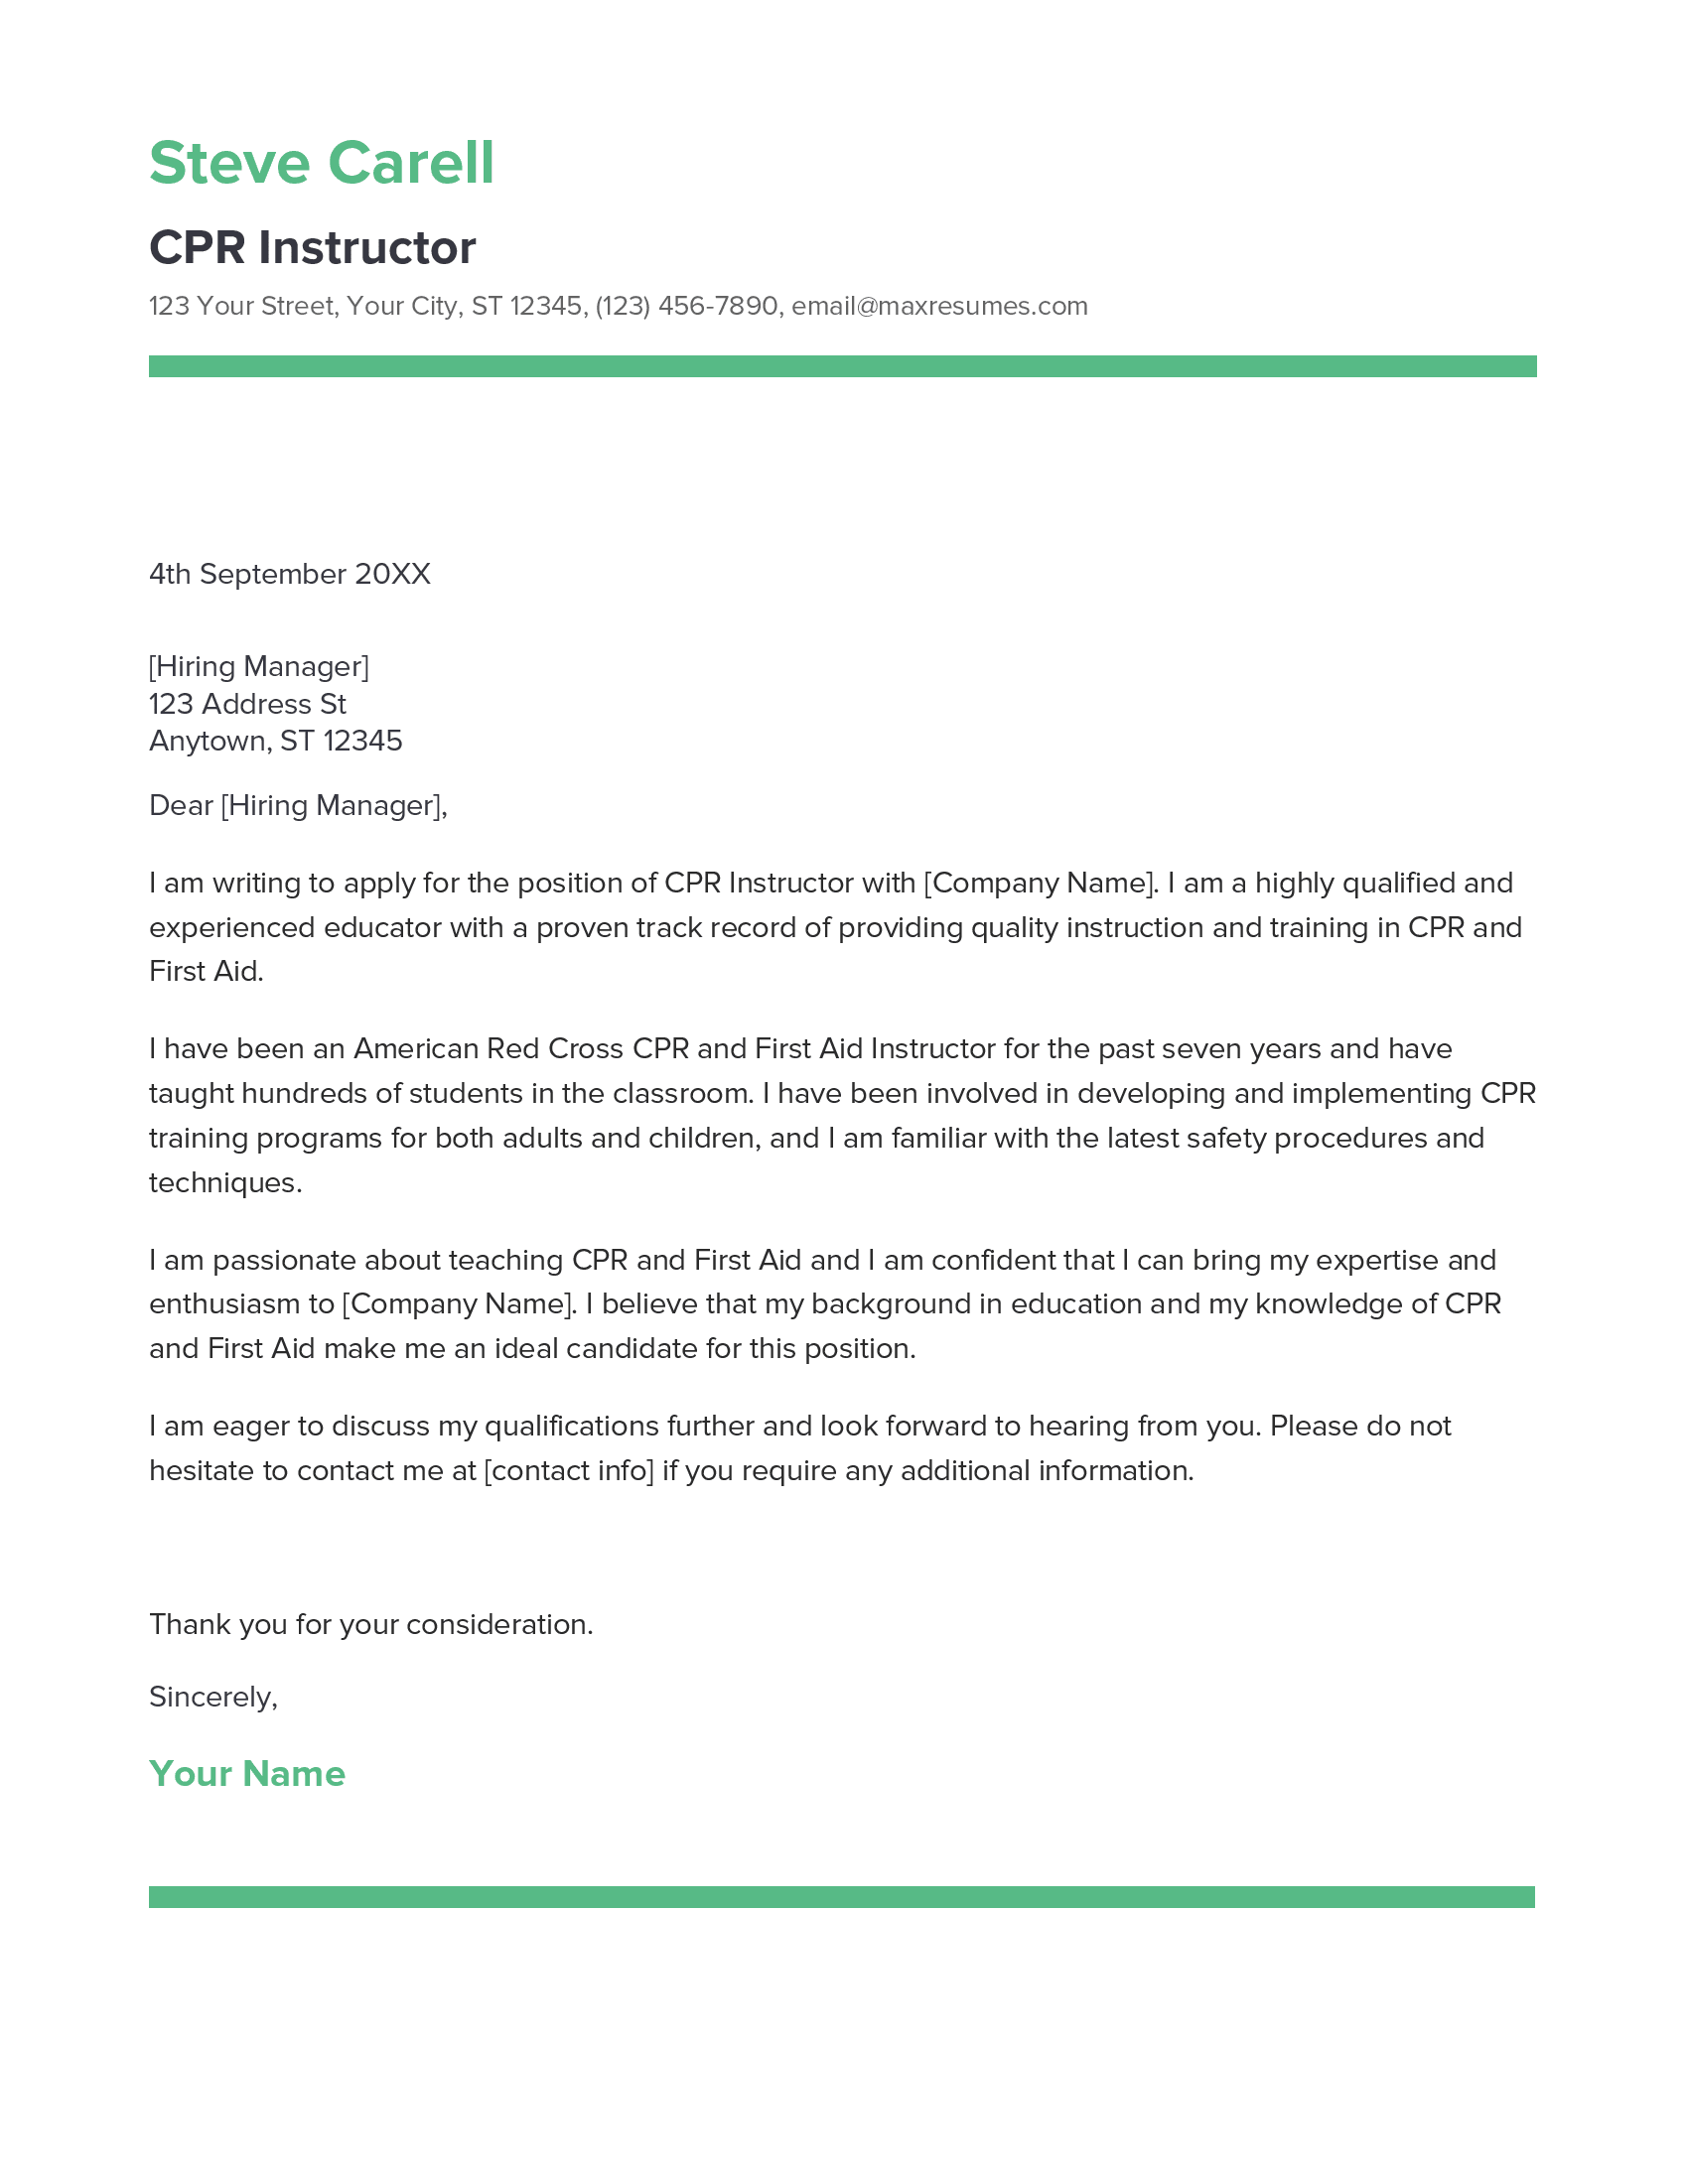 CPR Instructor Cover Letter Example